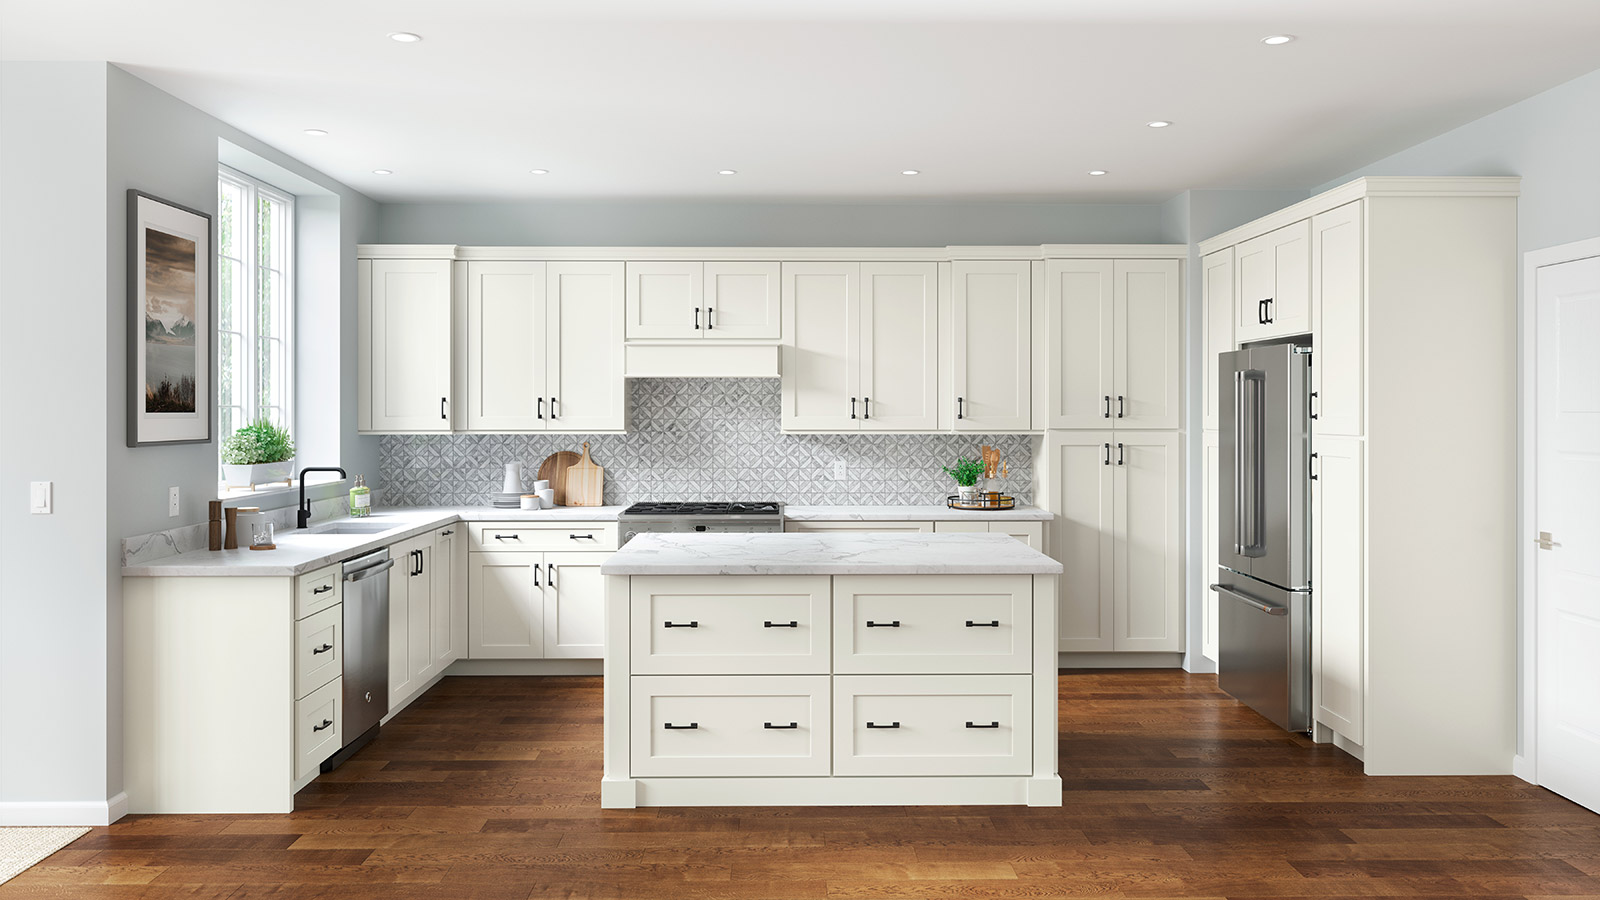 allen + roth Cabinetry Find Your Style